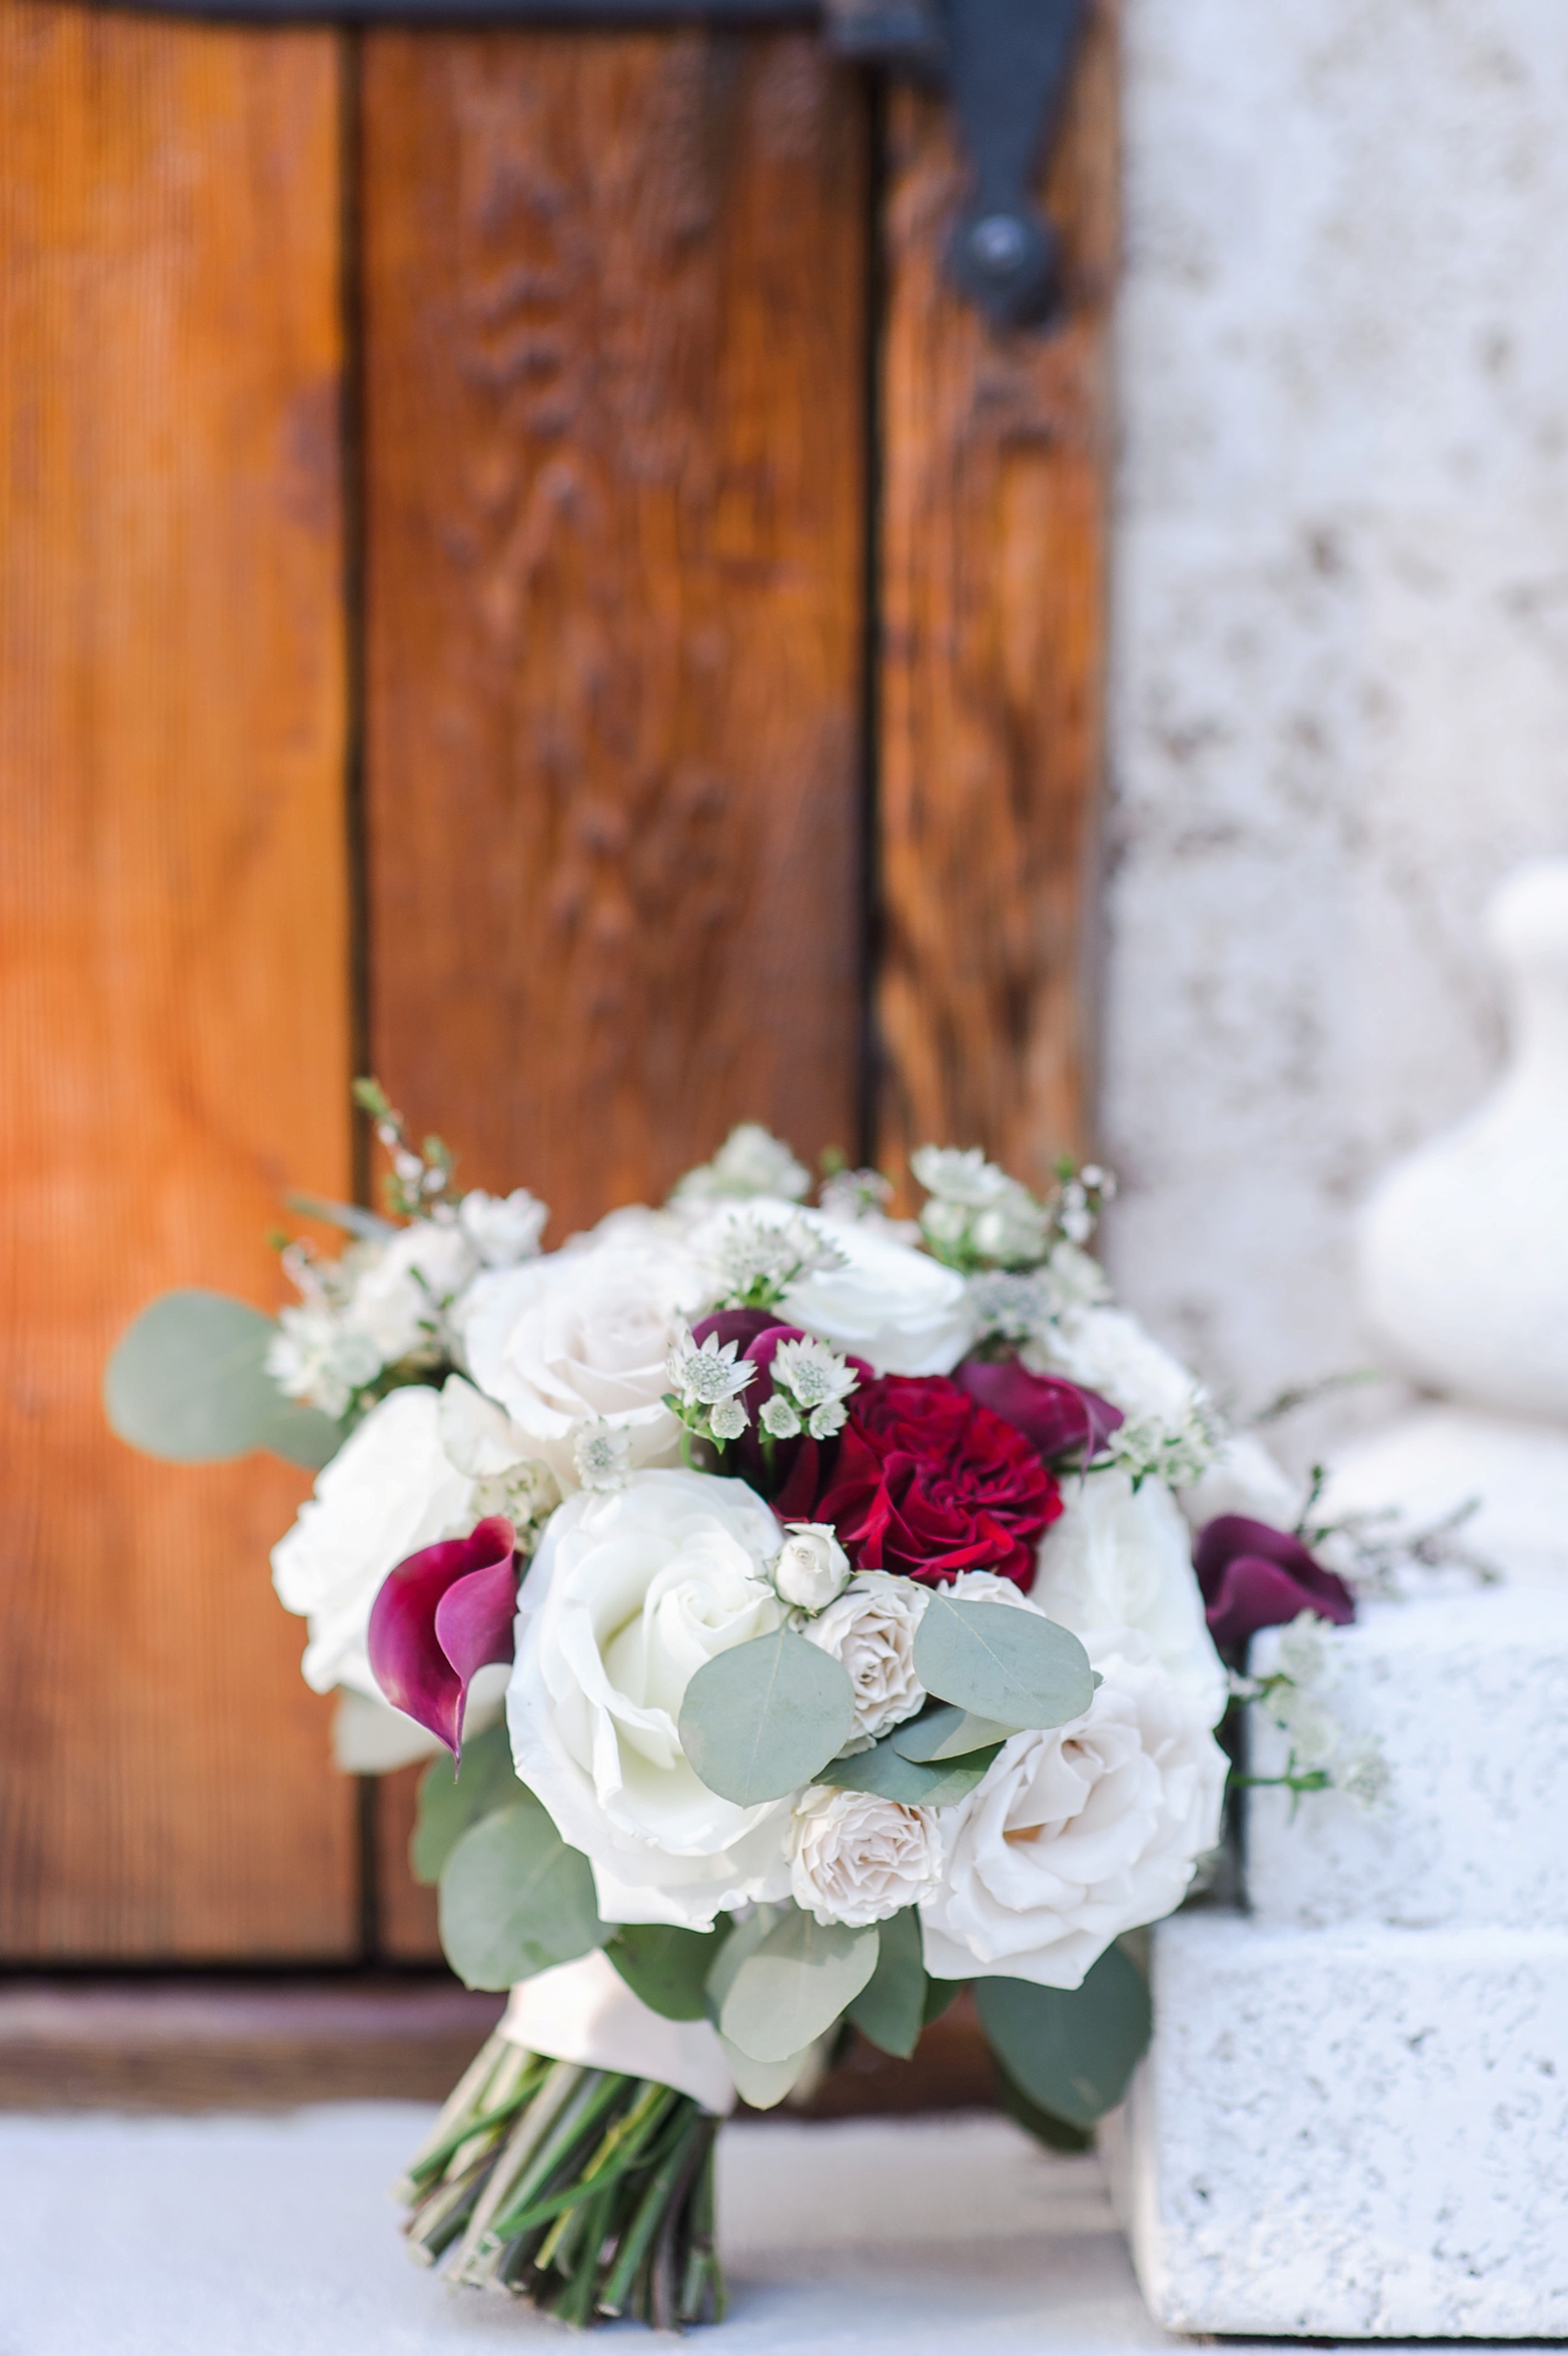 The brides bouquet filled with roses leaning against a stone pillar by Sarah & Ben Photography located in Tampa, FL